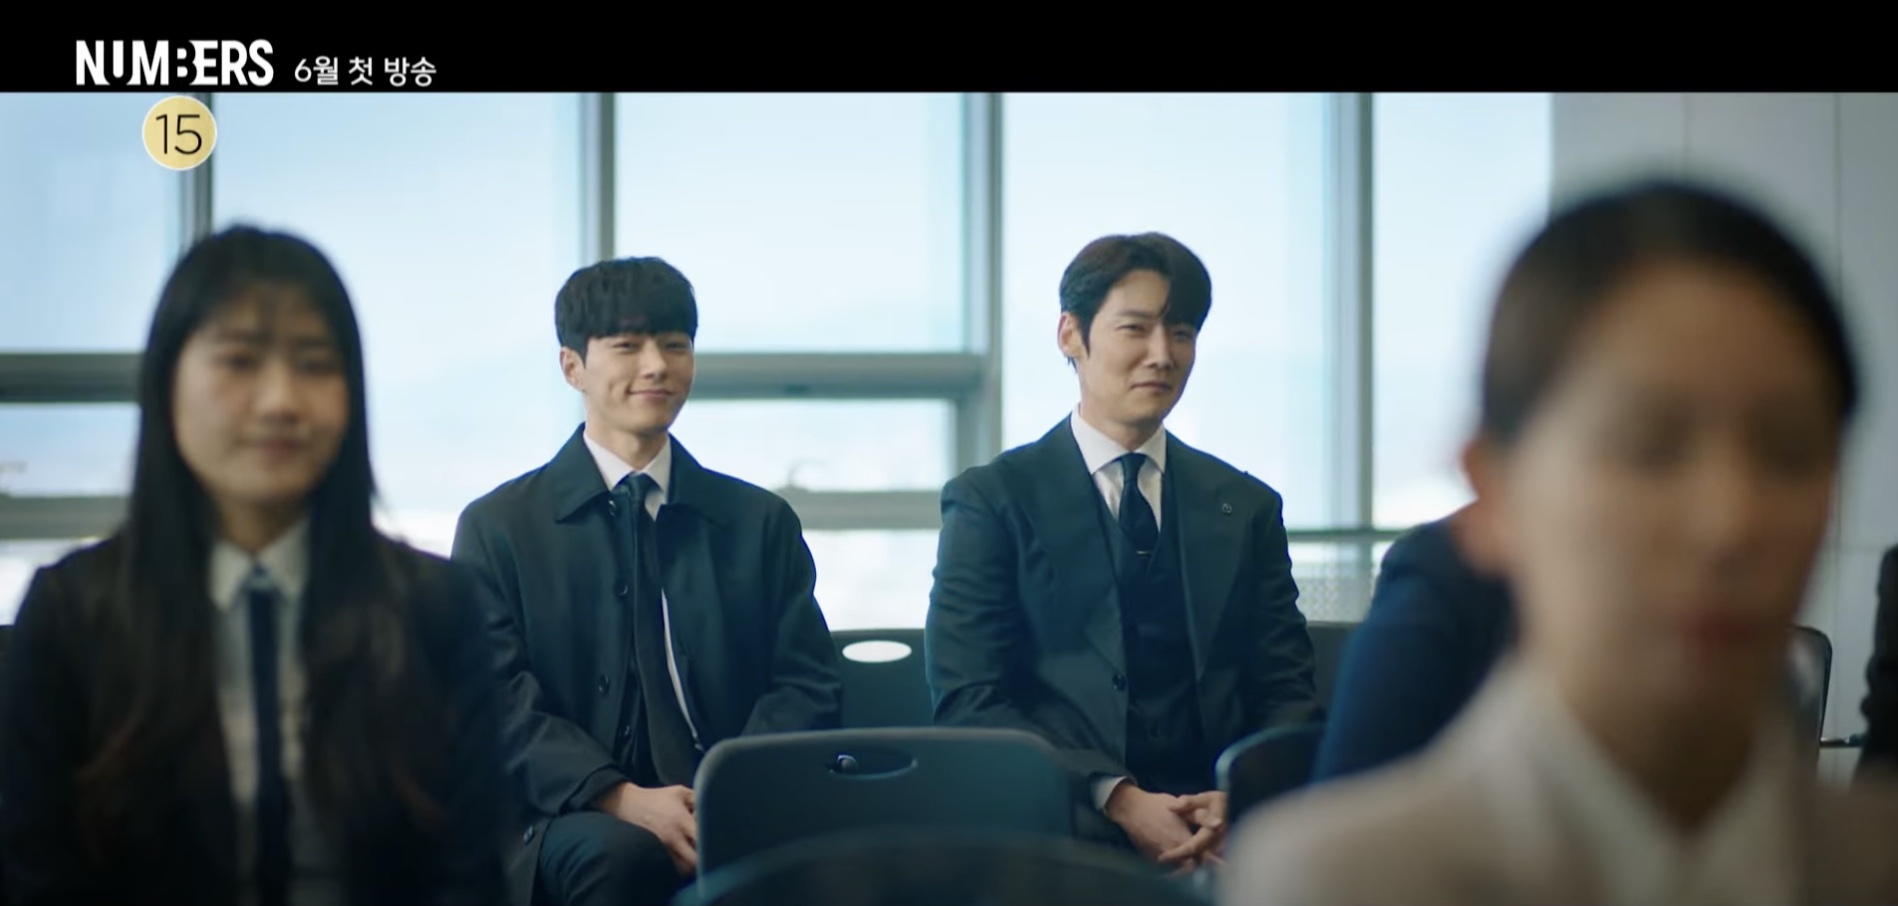 Let the bromance begin in Numbers’ new teaser